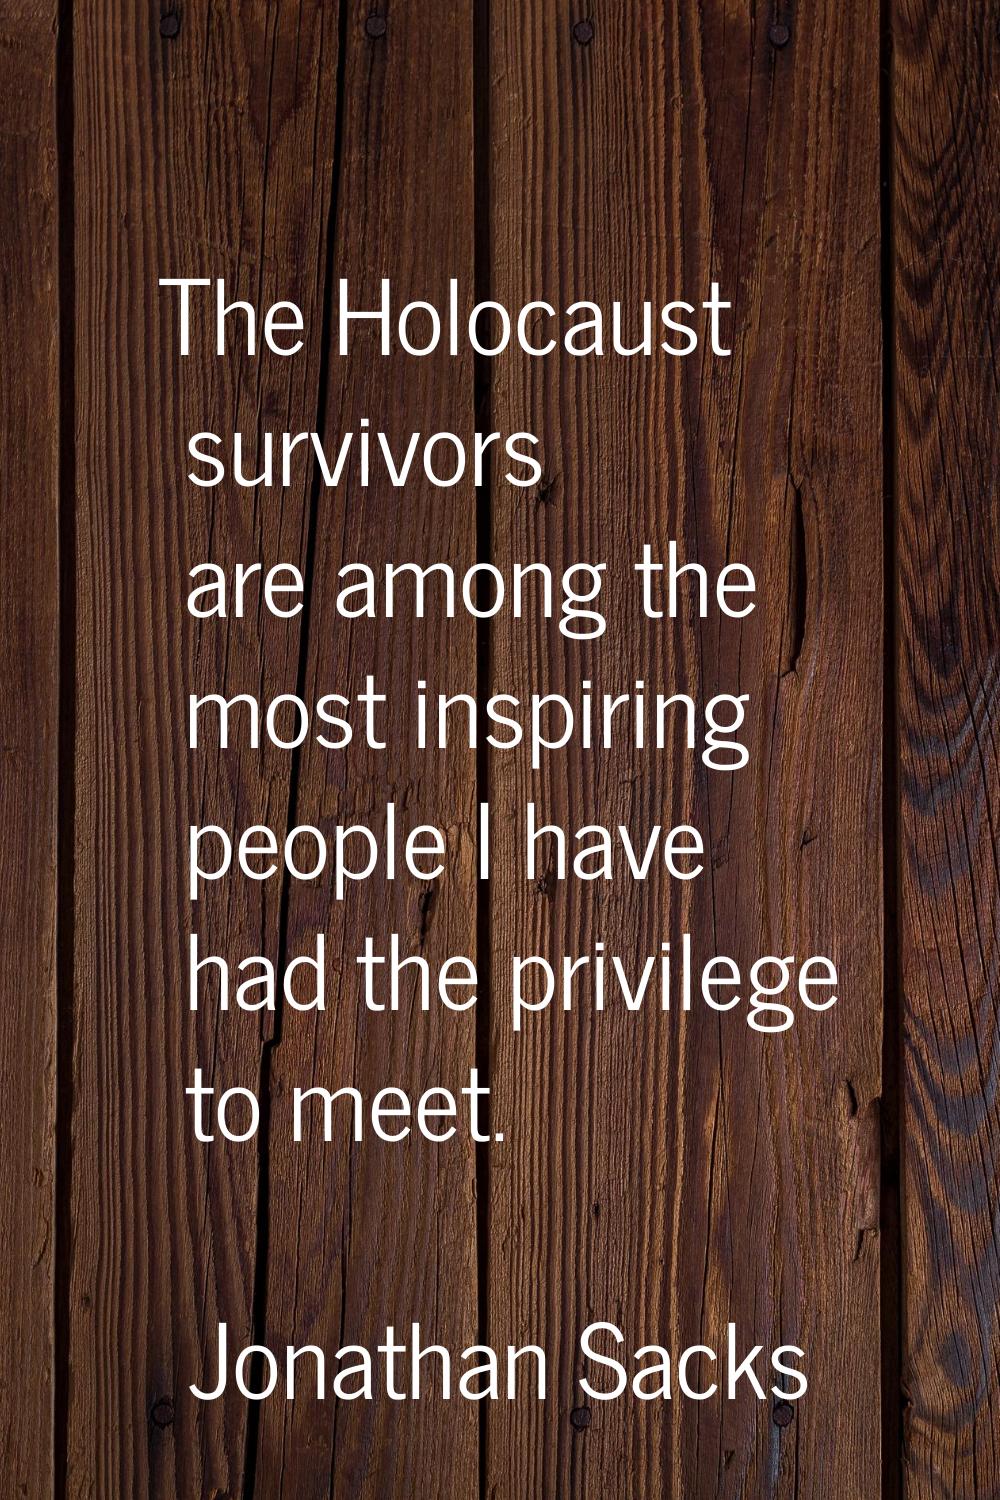 The Holocaust survivors are among the most inspiring people I have had the privilege to meet.